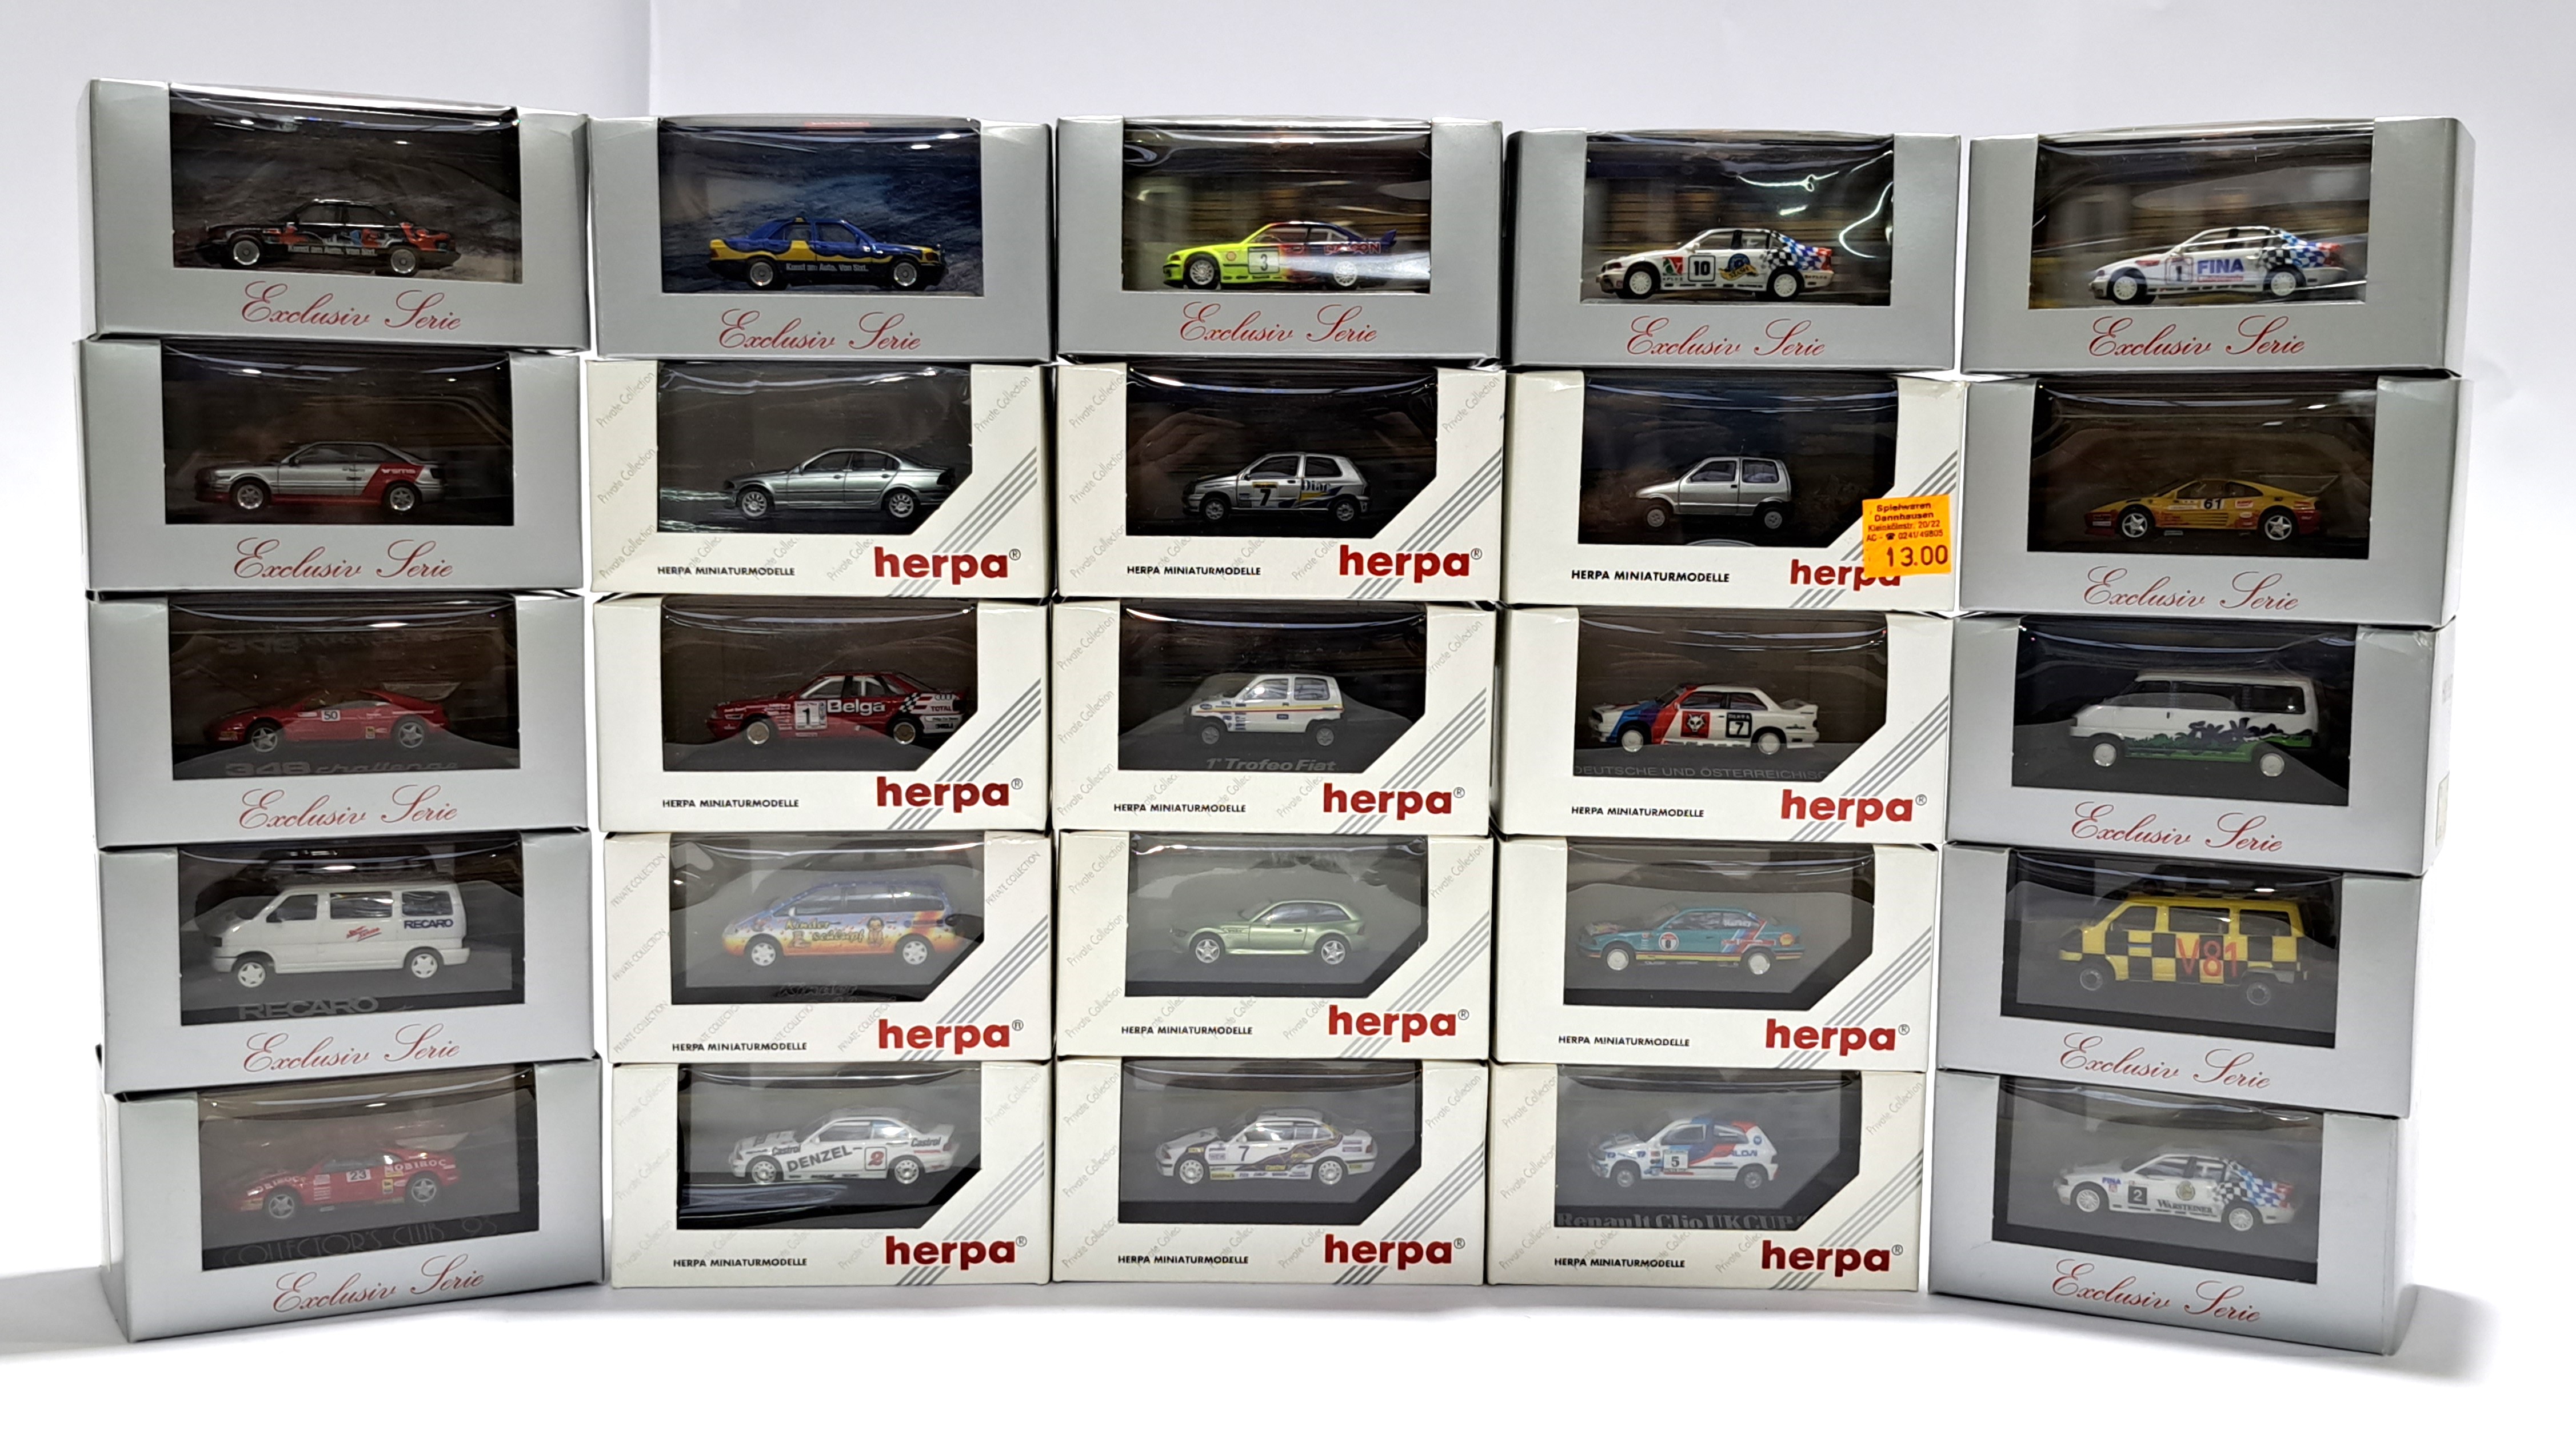 Herpa "Private Collection" & "Exclusiv Serie" and similar 1/87 scale diecast cars